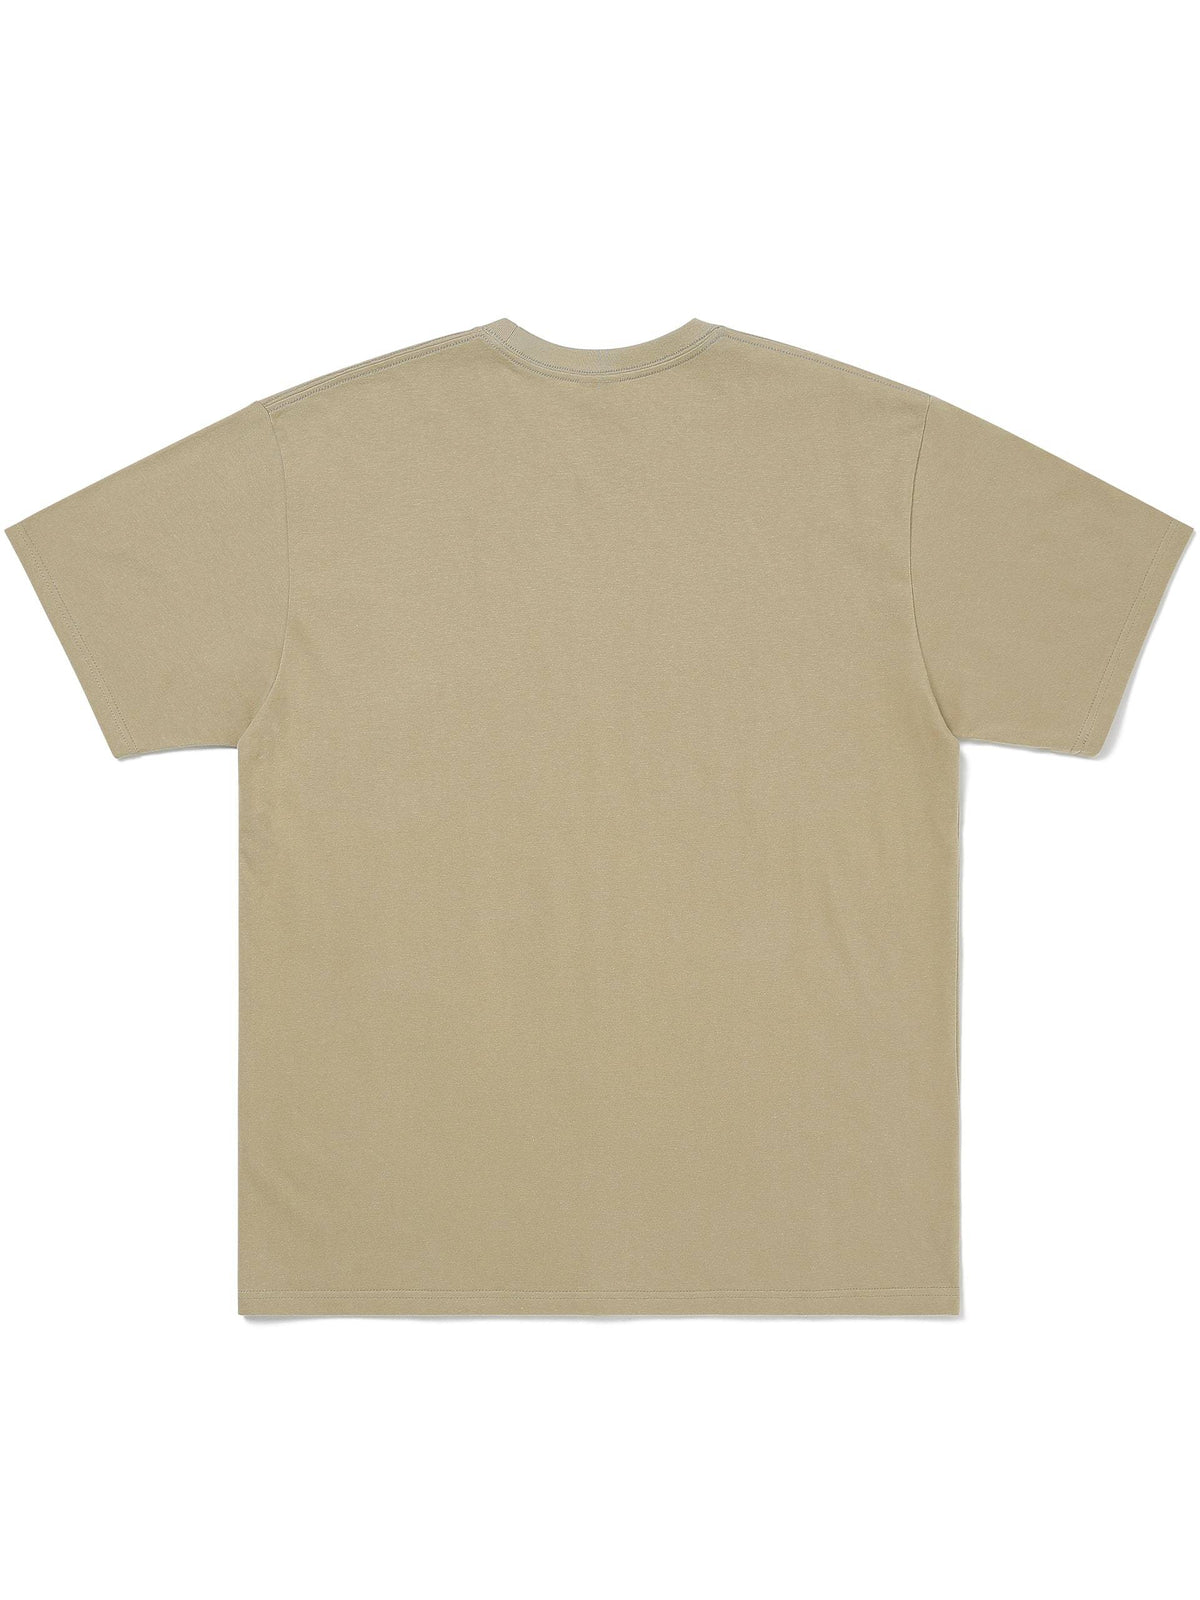 Low Arch Tee T-Shirt 